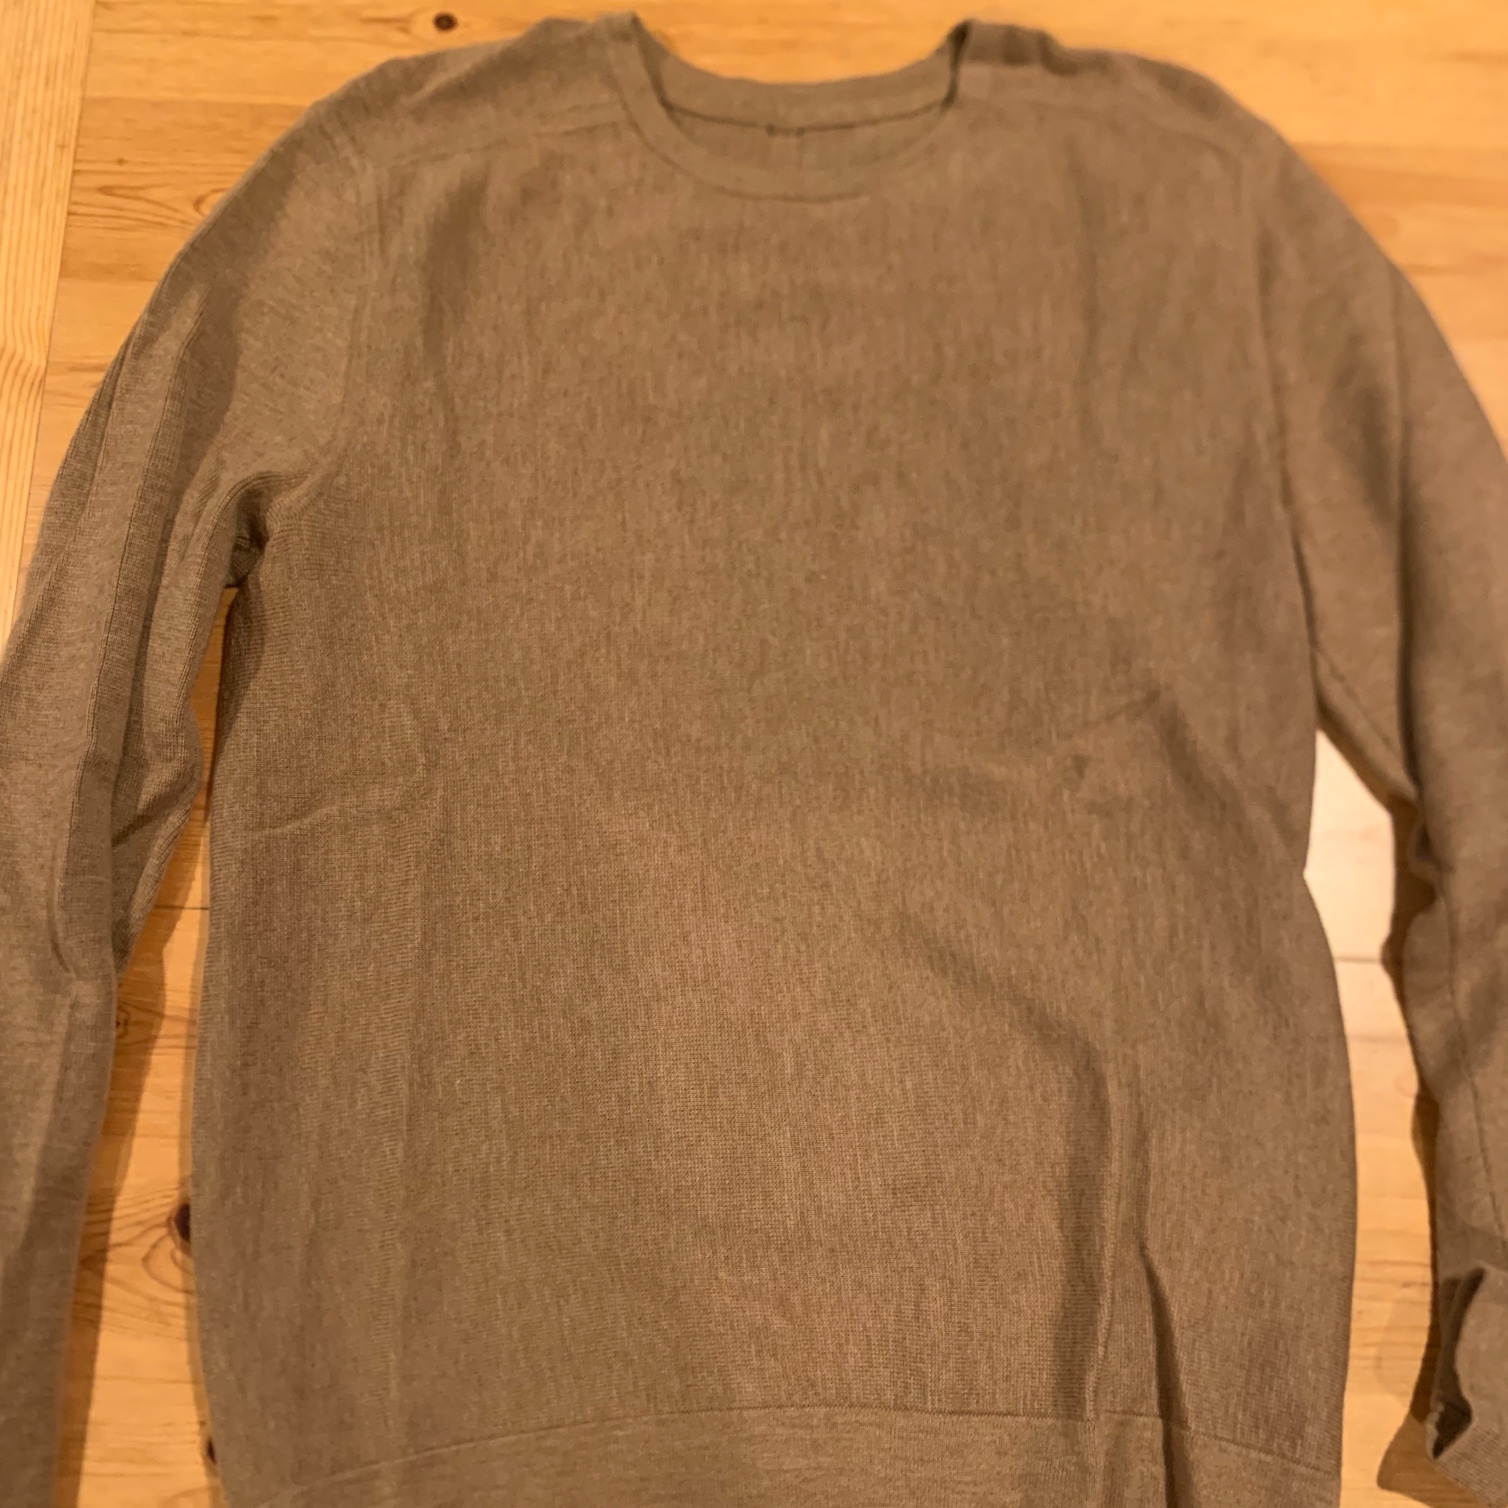 Used Lululemon Sweater Brown Size Small